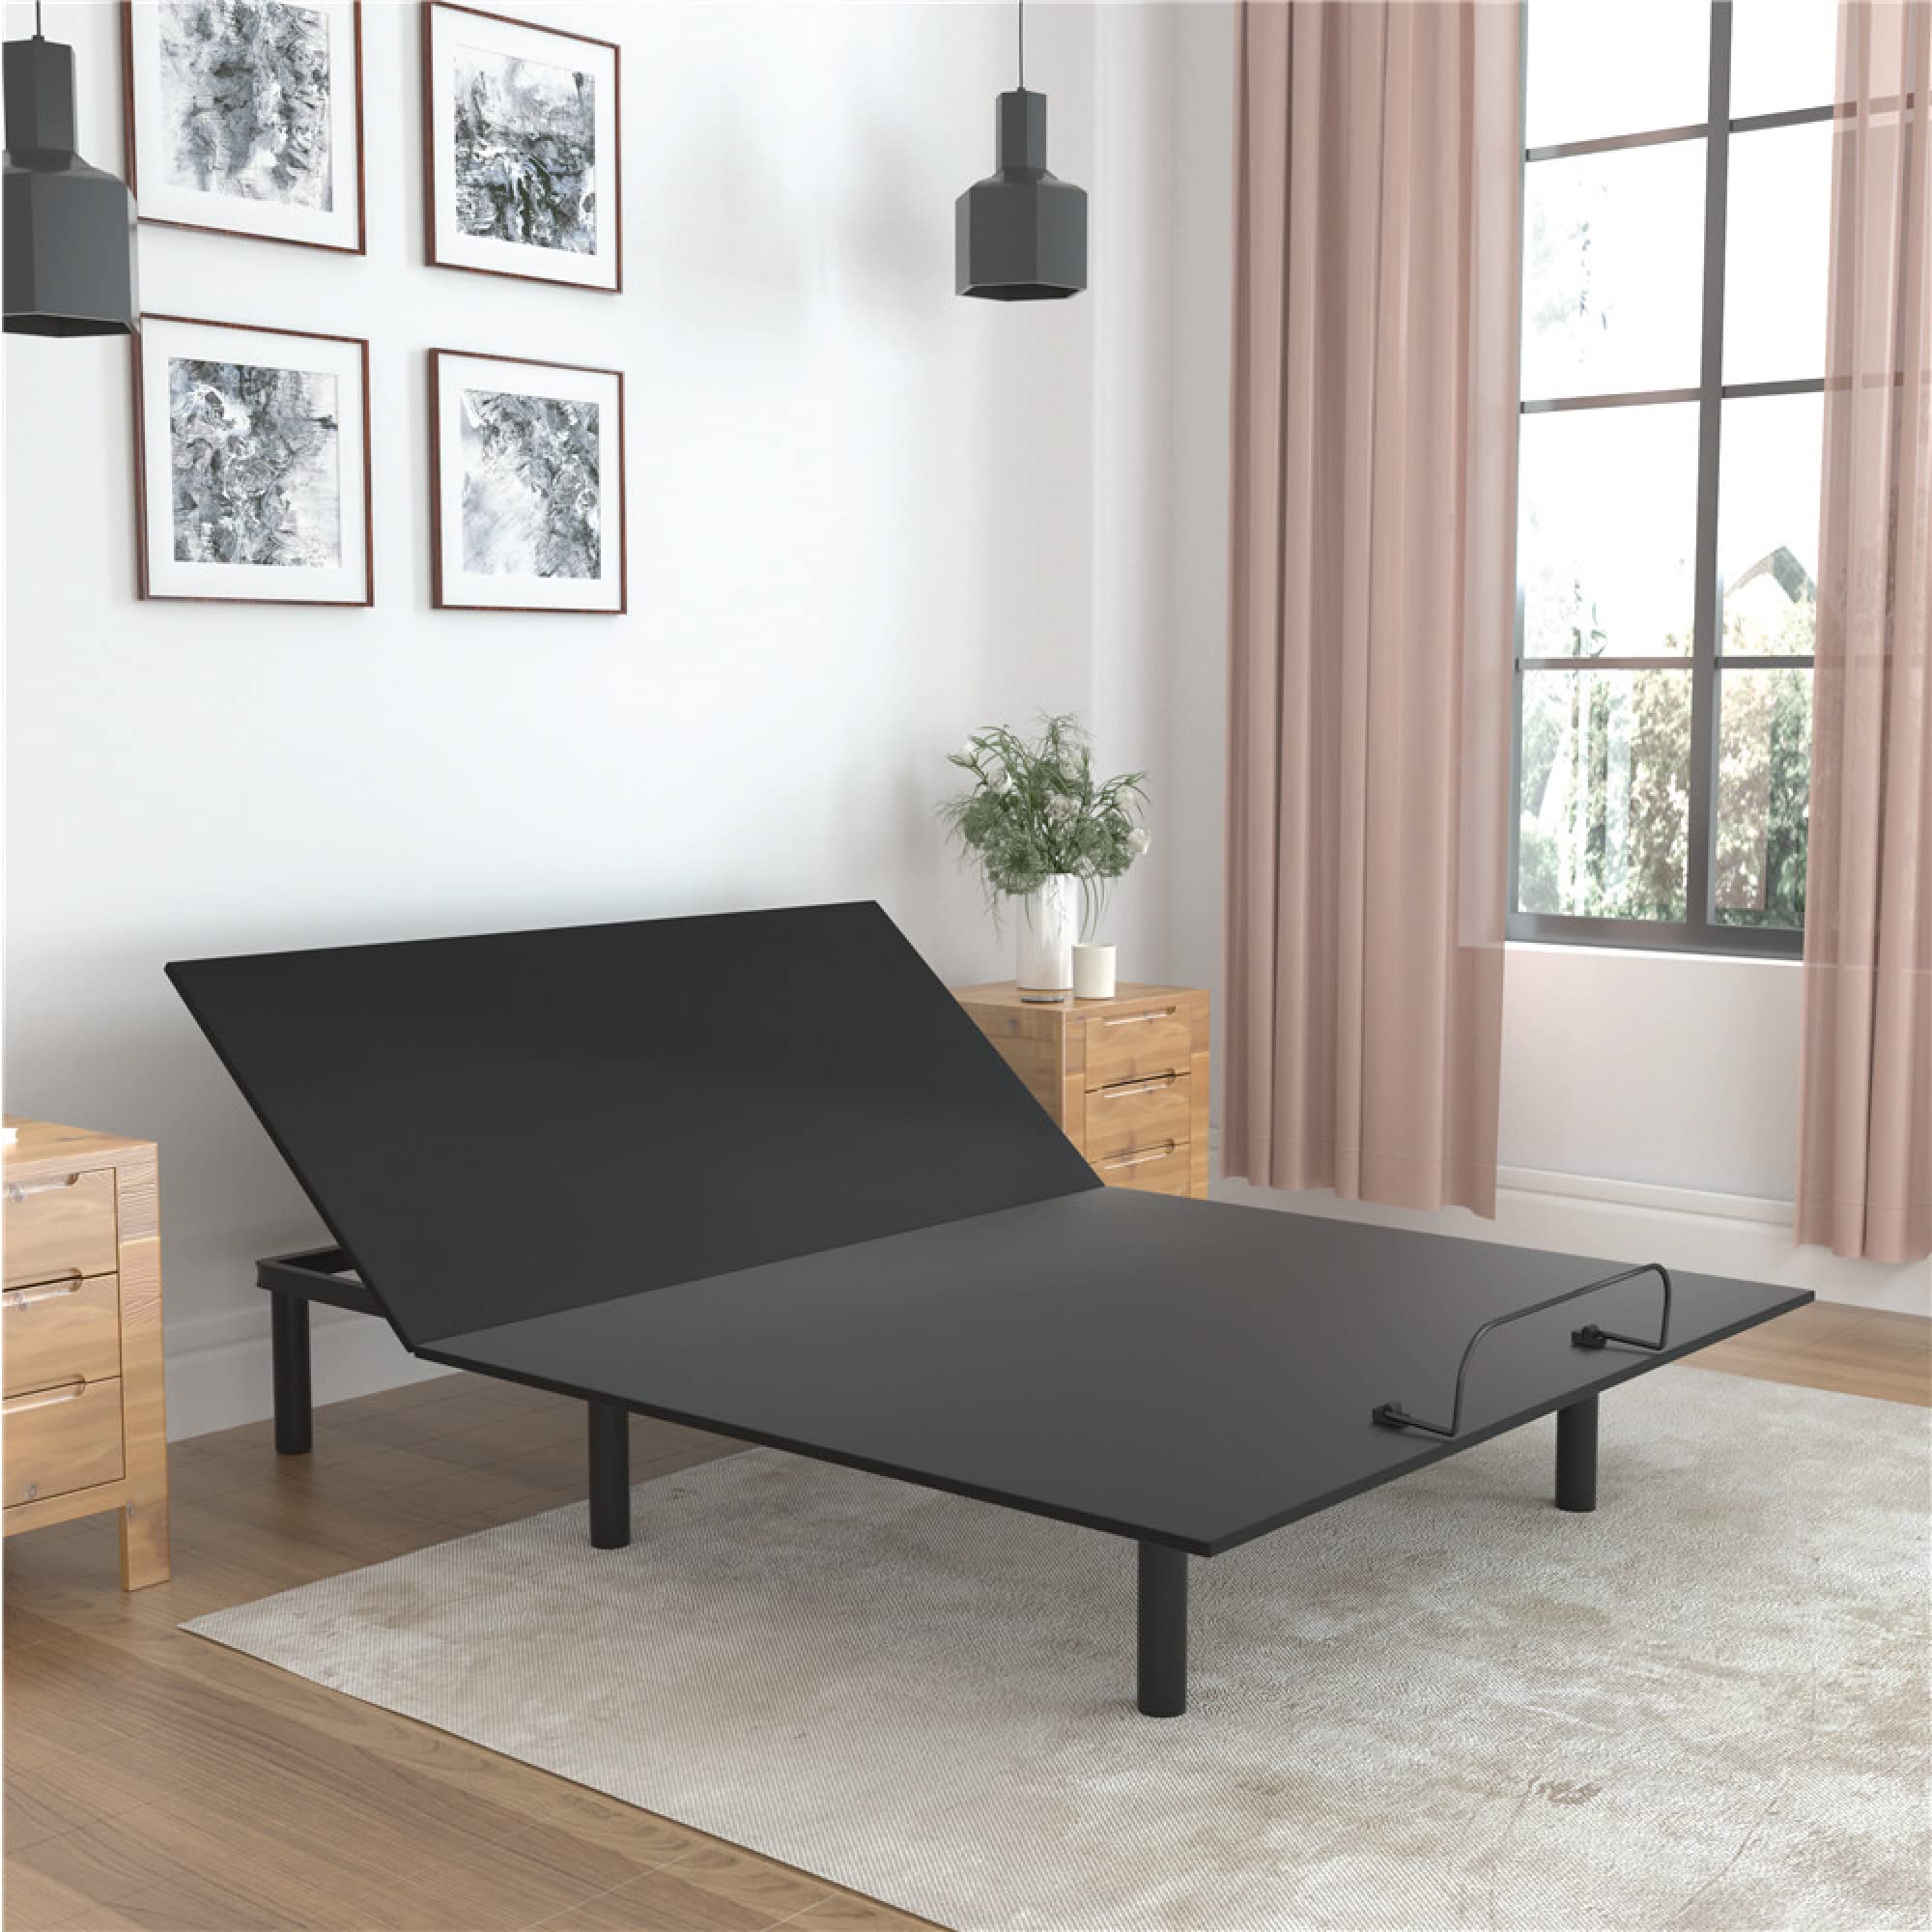 Book Cover Classic Brands Adjustable Comfort Upholstered Adjustable Bed Base with Massage, Wireless Remote, Three Leg Heights, and USB Ports-Ergonomic, King, Black